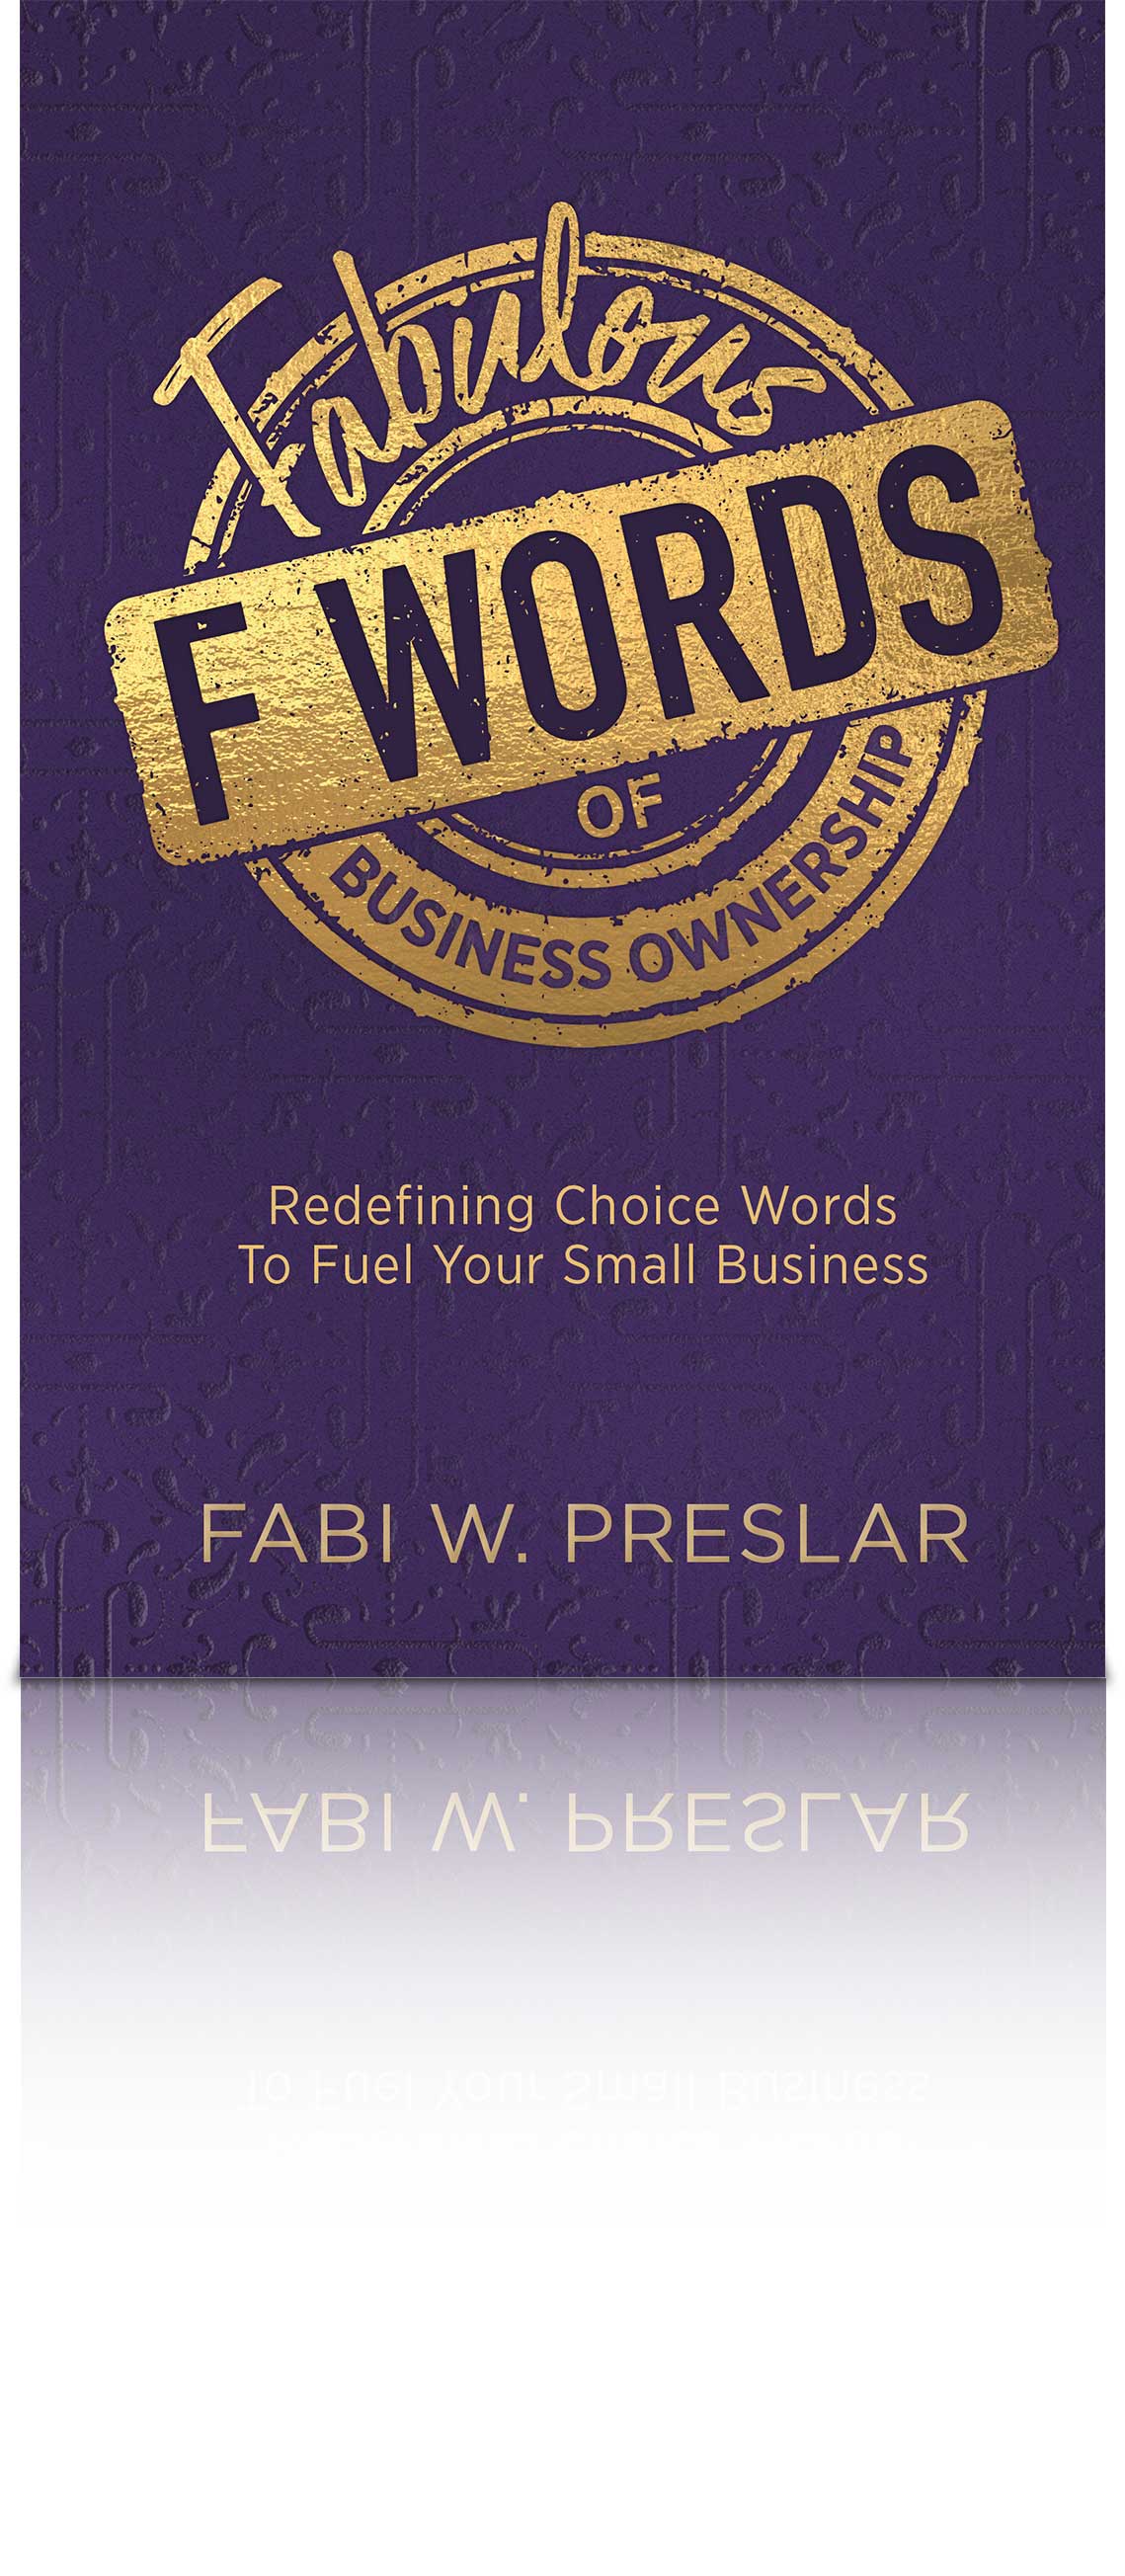 Words with F Logo - Fabulous F Words of Business Ownership